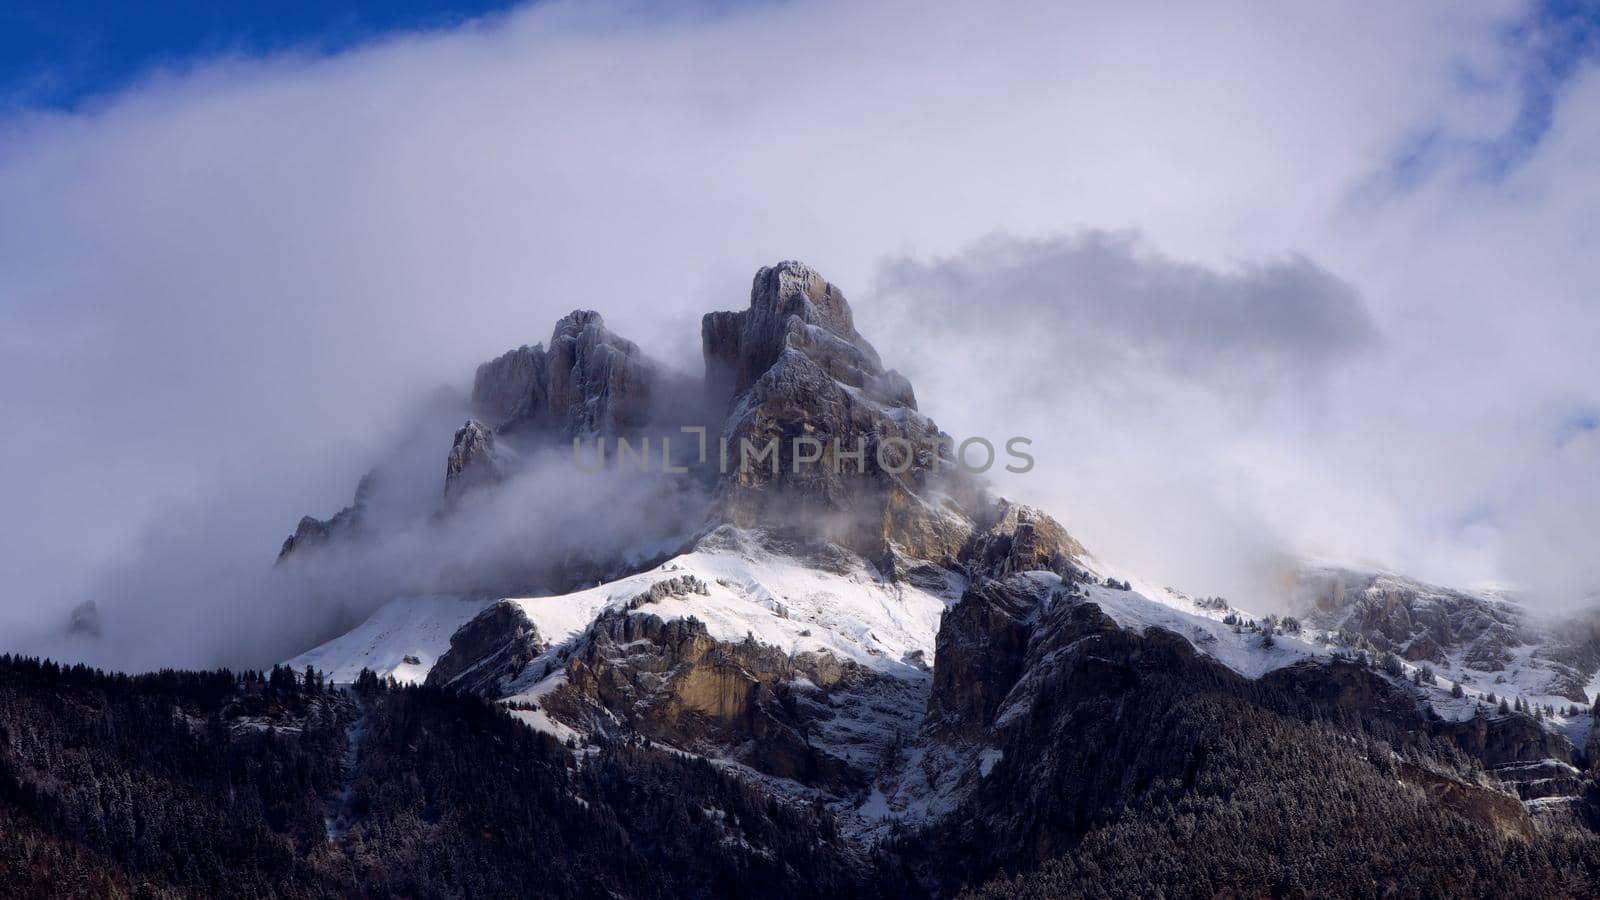 Photograph of sunlight and clouds obscuring and revealing the jagged peak of a mountain in the French Alps mountain range.